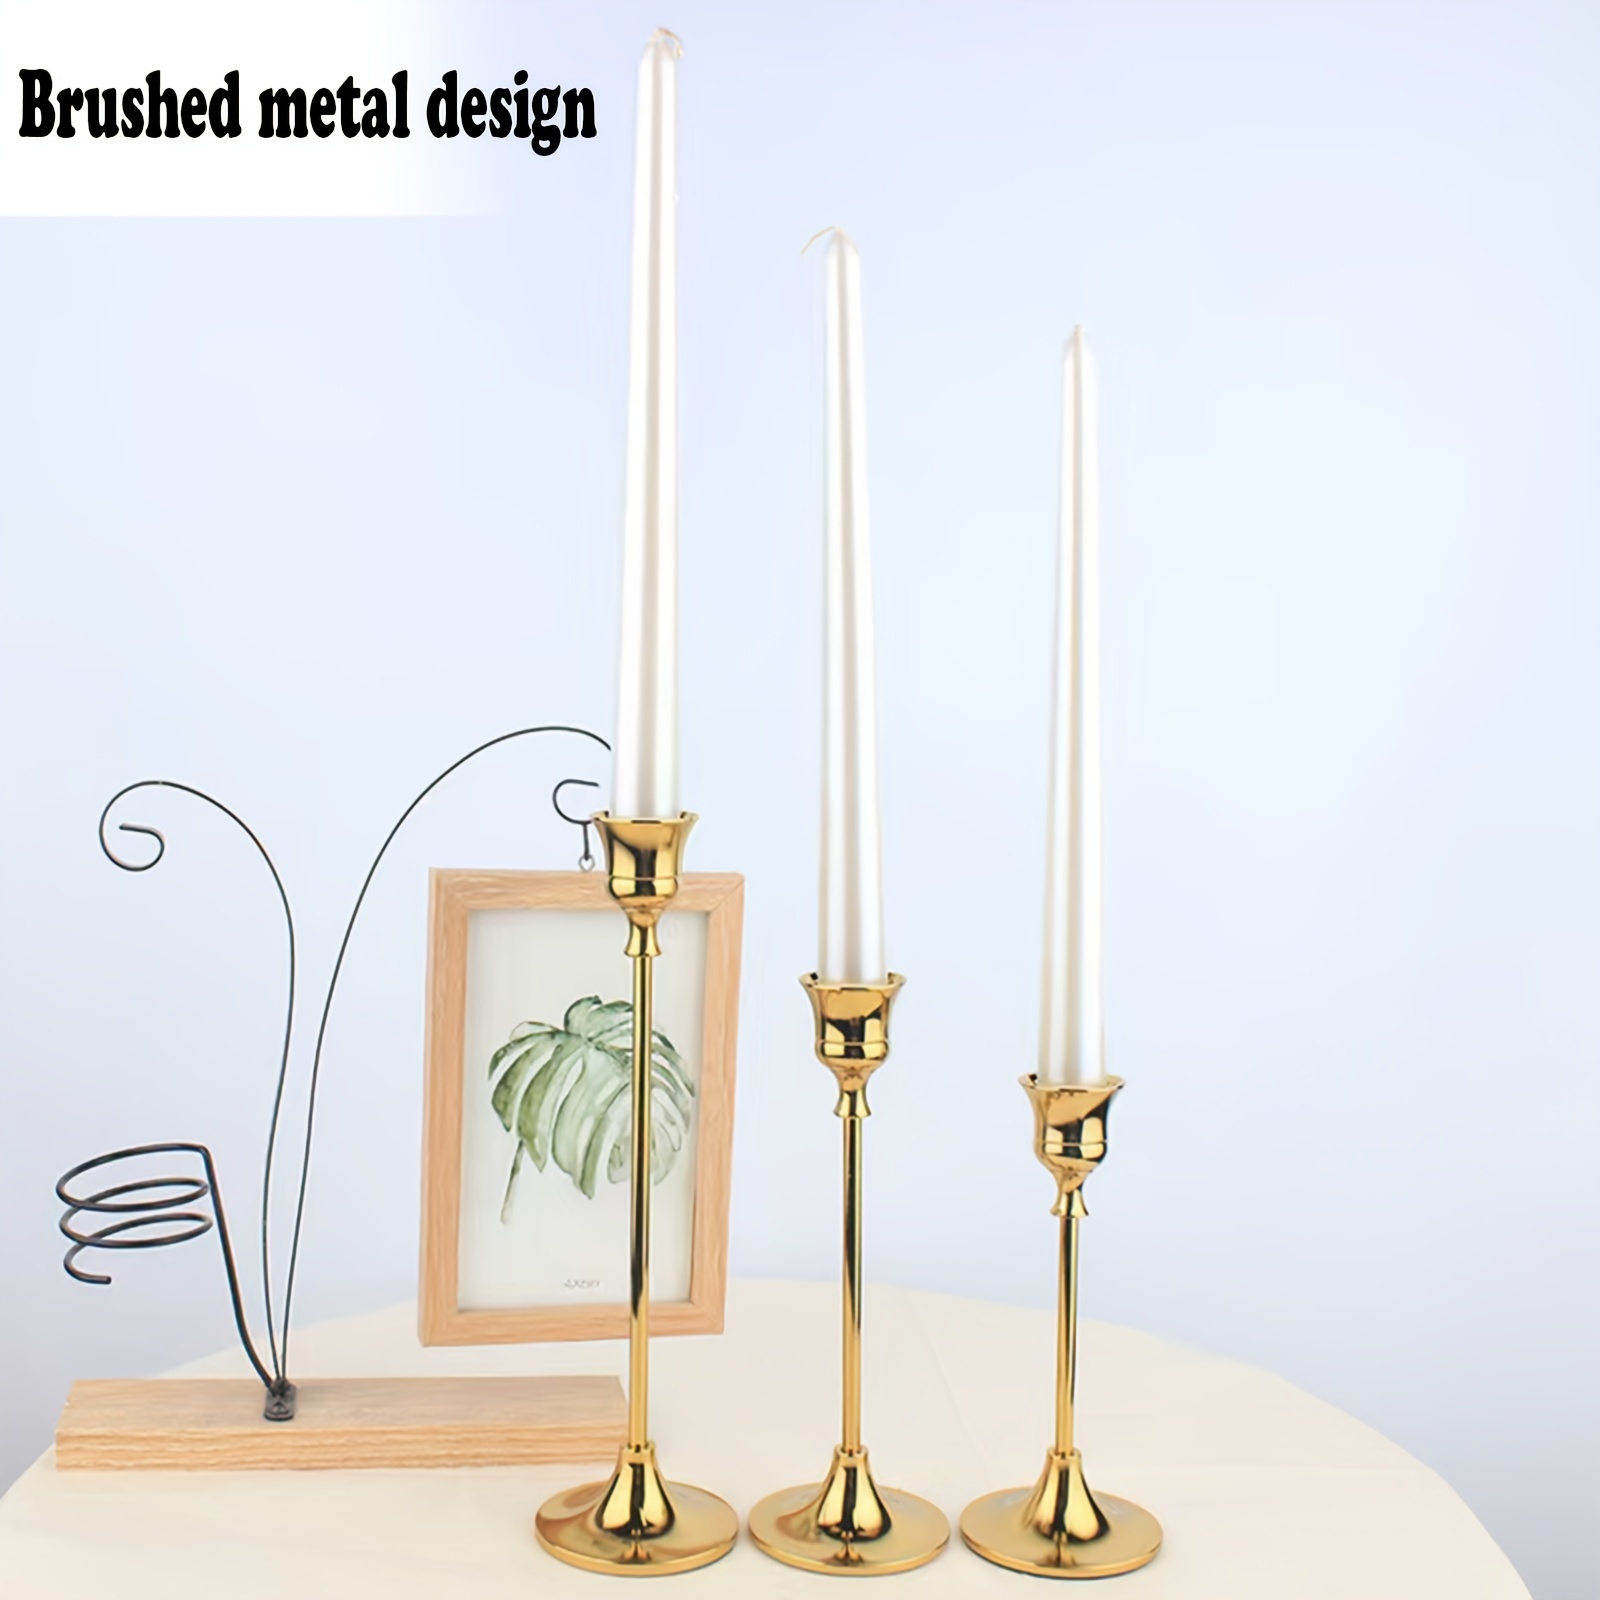  Set of 2 Brass Taper Candle Holders, Centerpiece Table  Decorative Vintage, Modern, Metal Candlestick Holders for Reception  Candlelight Dinner Ornaments : Home & Kitchen